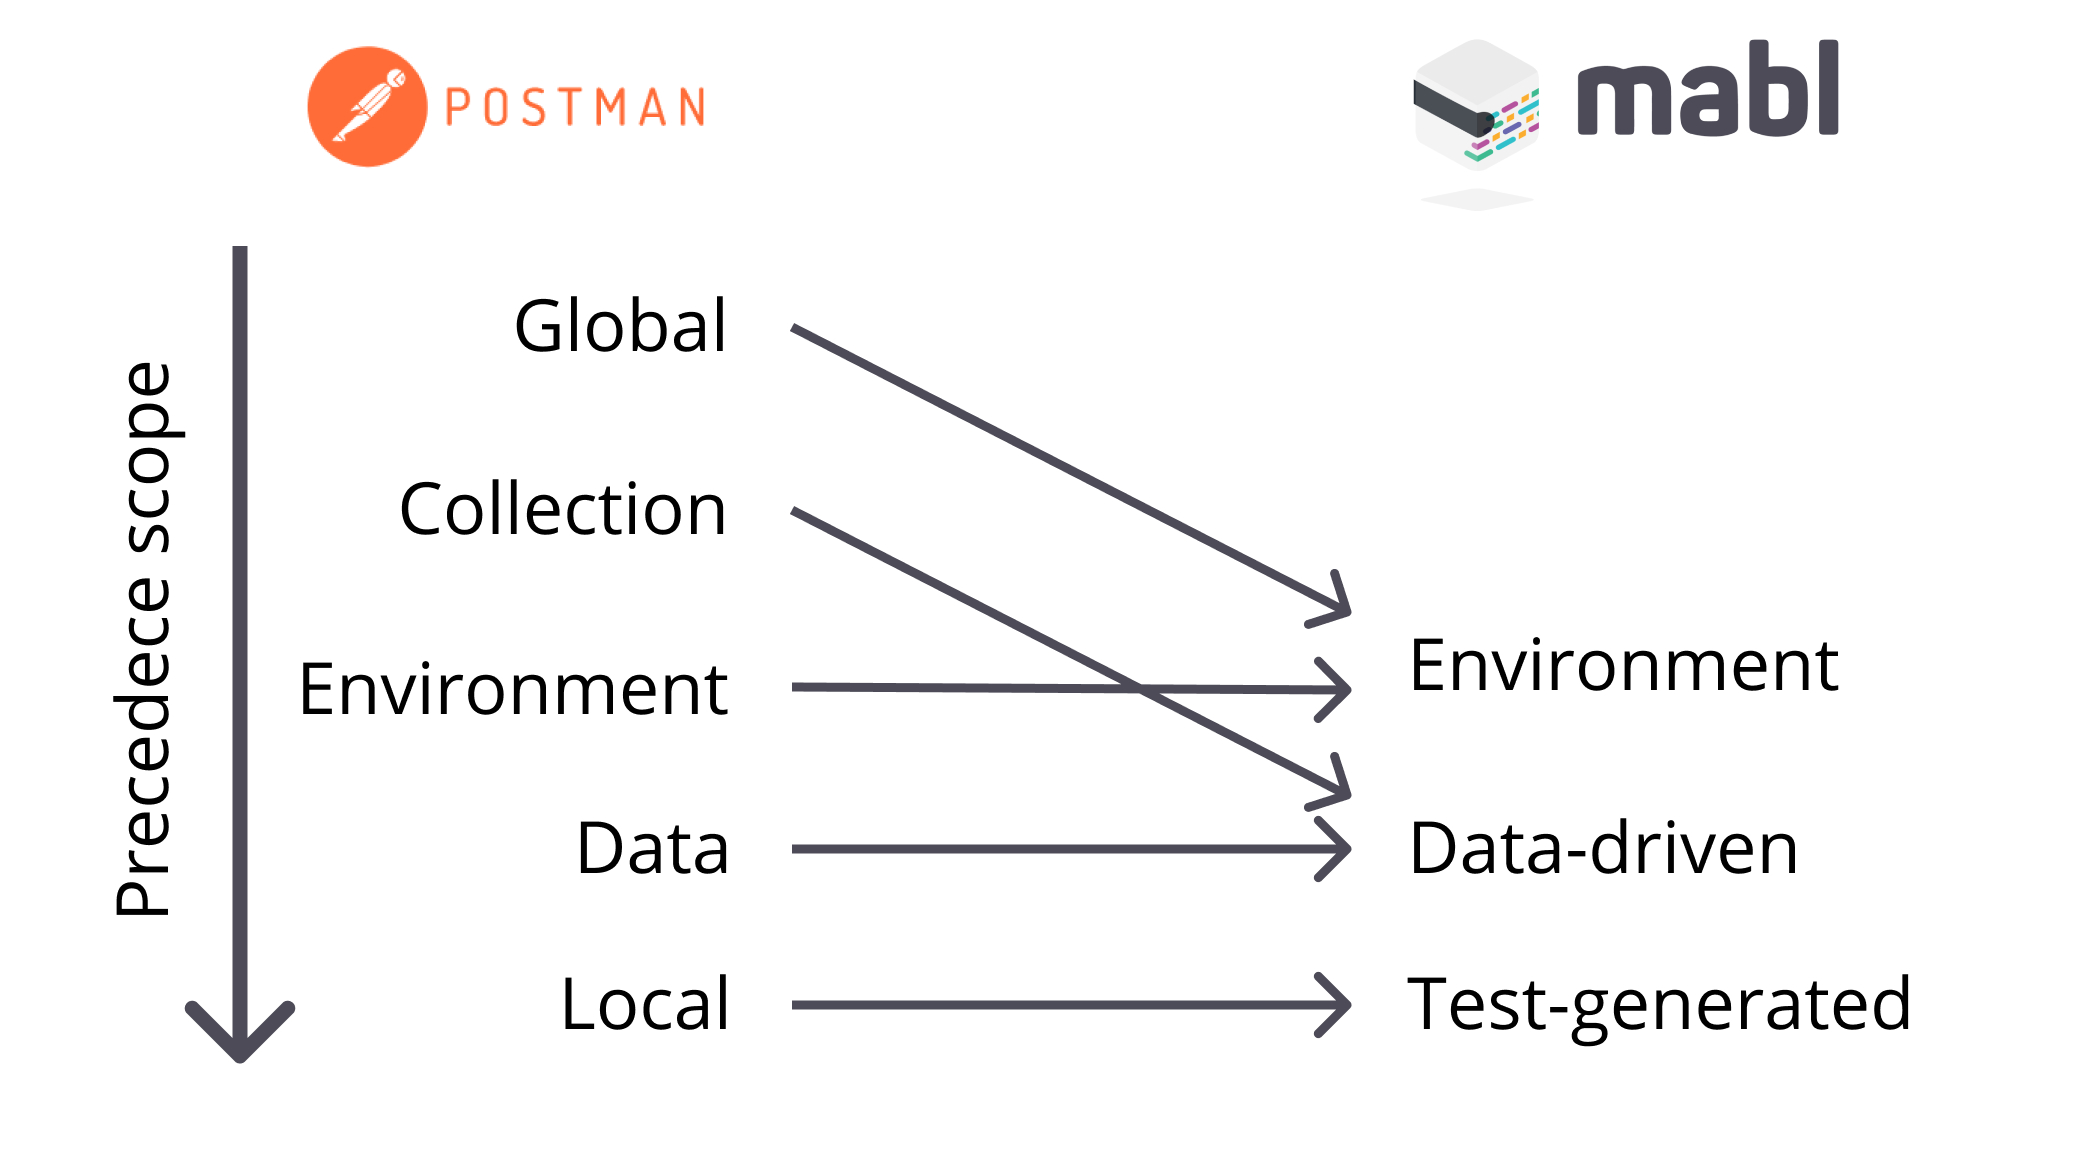 Variables mapping between Postman and mabl.